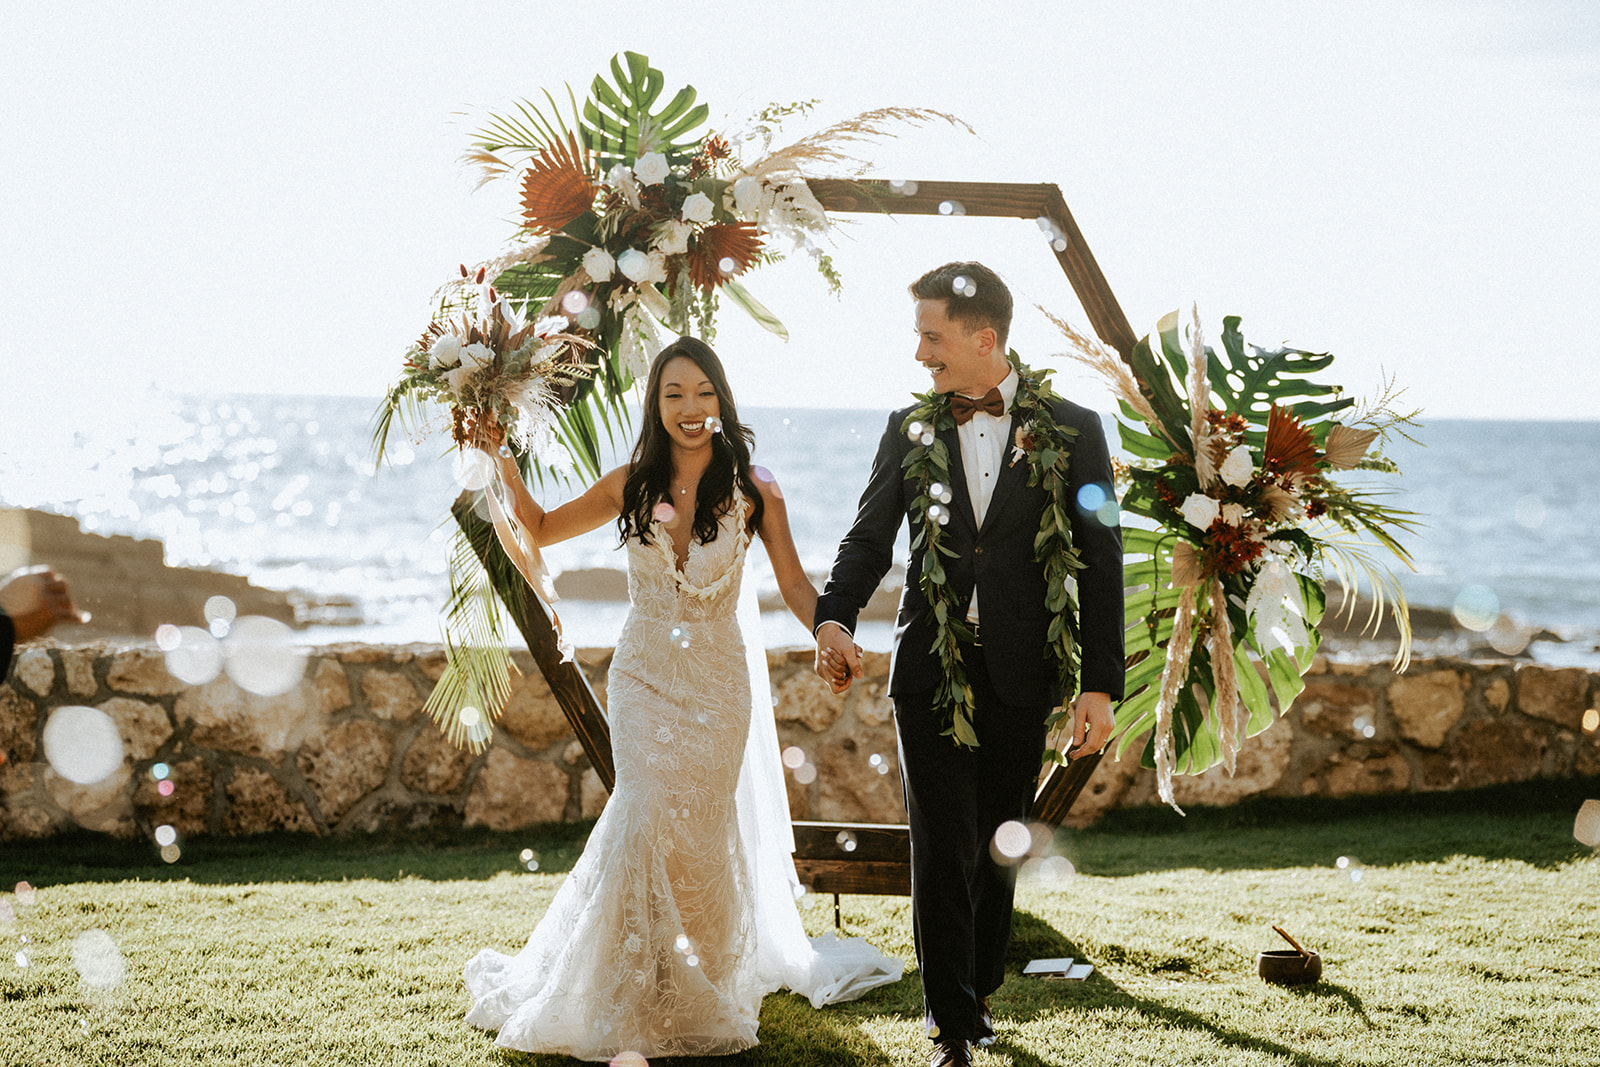 Bride and groom bubble send off at Lanikuhonua, Hawaii on a sunny day